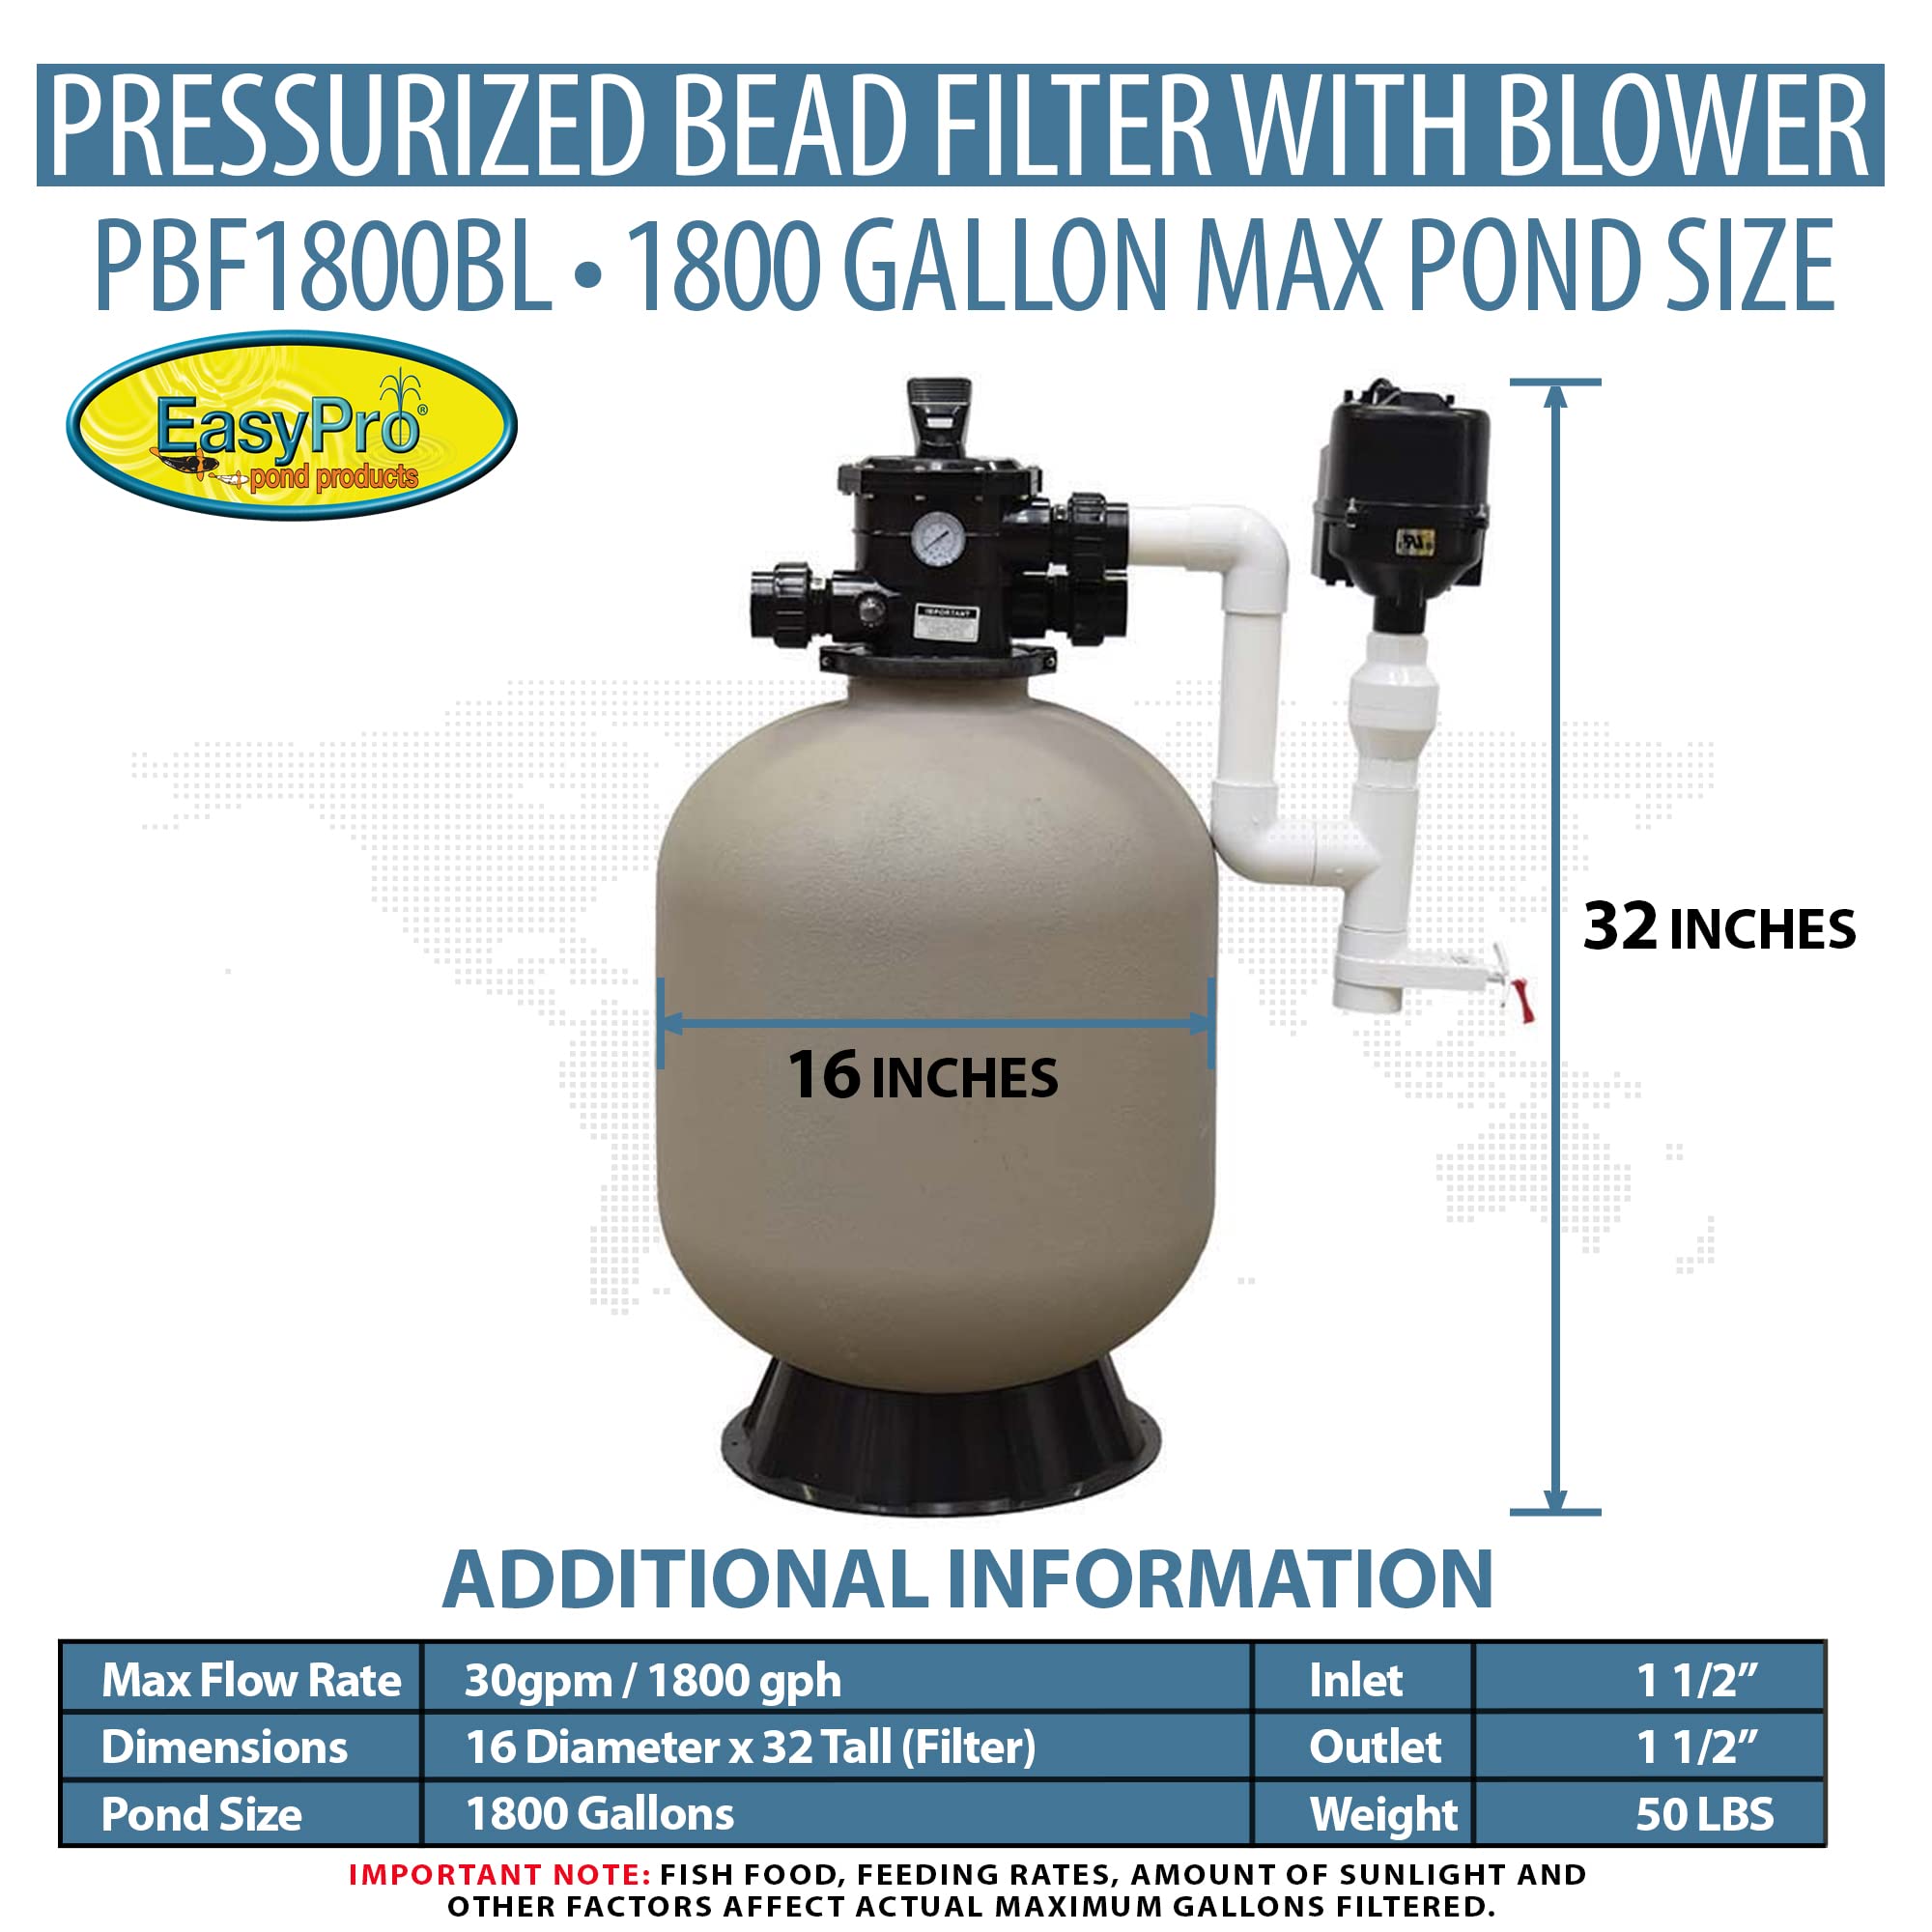 EasyPro PBF1800BL Pressurized Bead Filter with Blower for Ponds & Fish Systems / 1800 Gallon Max. / Mechanical Media Provides Excellent Filtration/Easy Installation & Cleaning